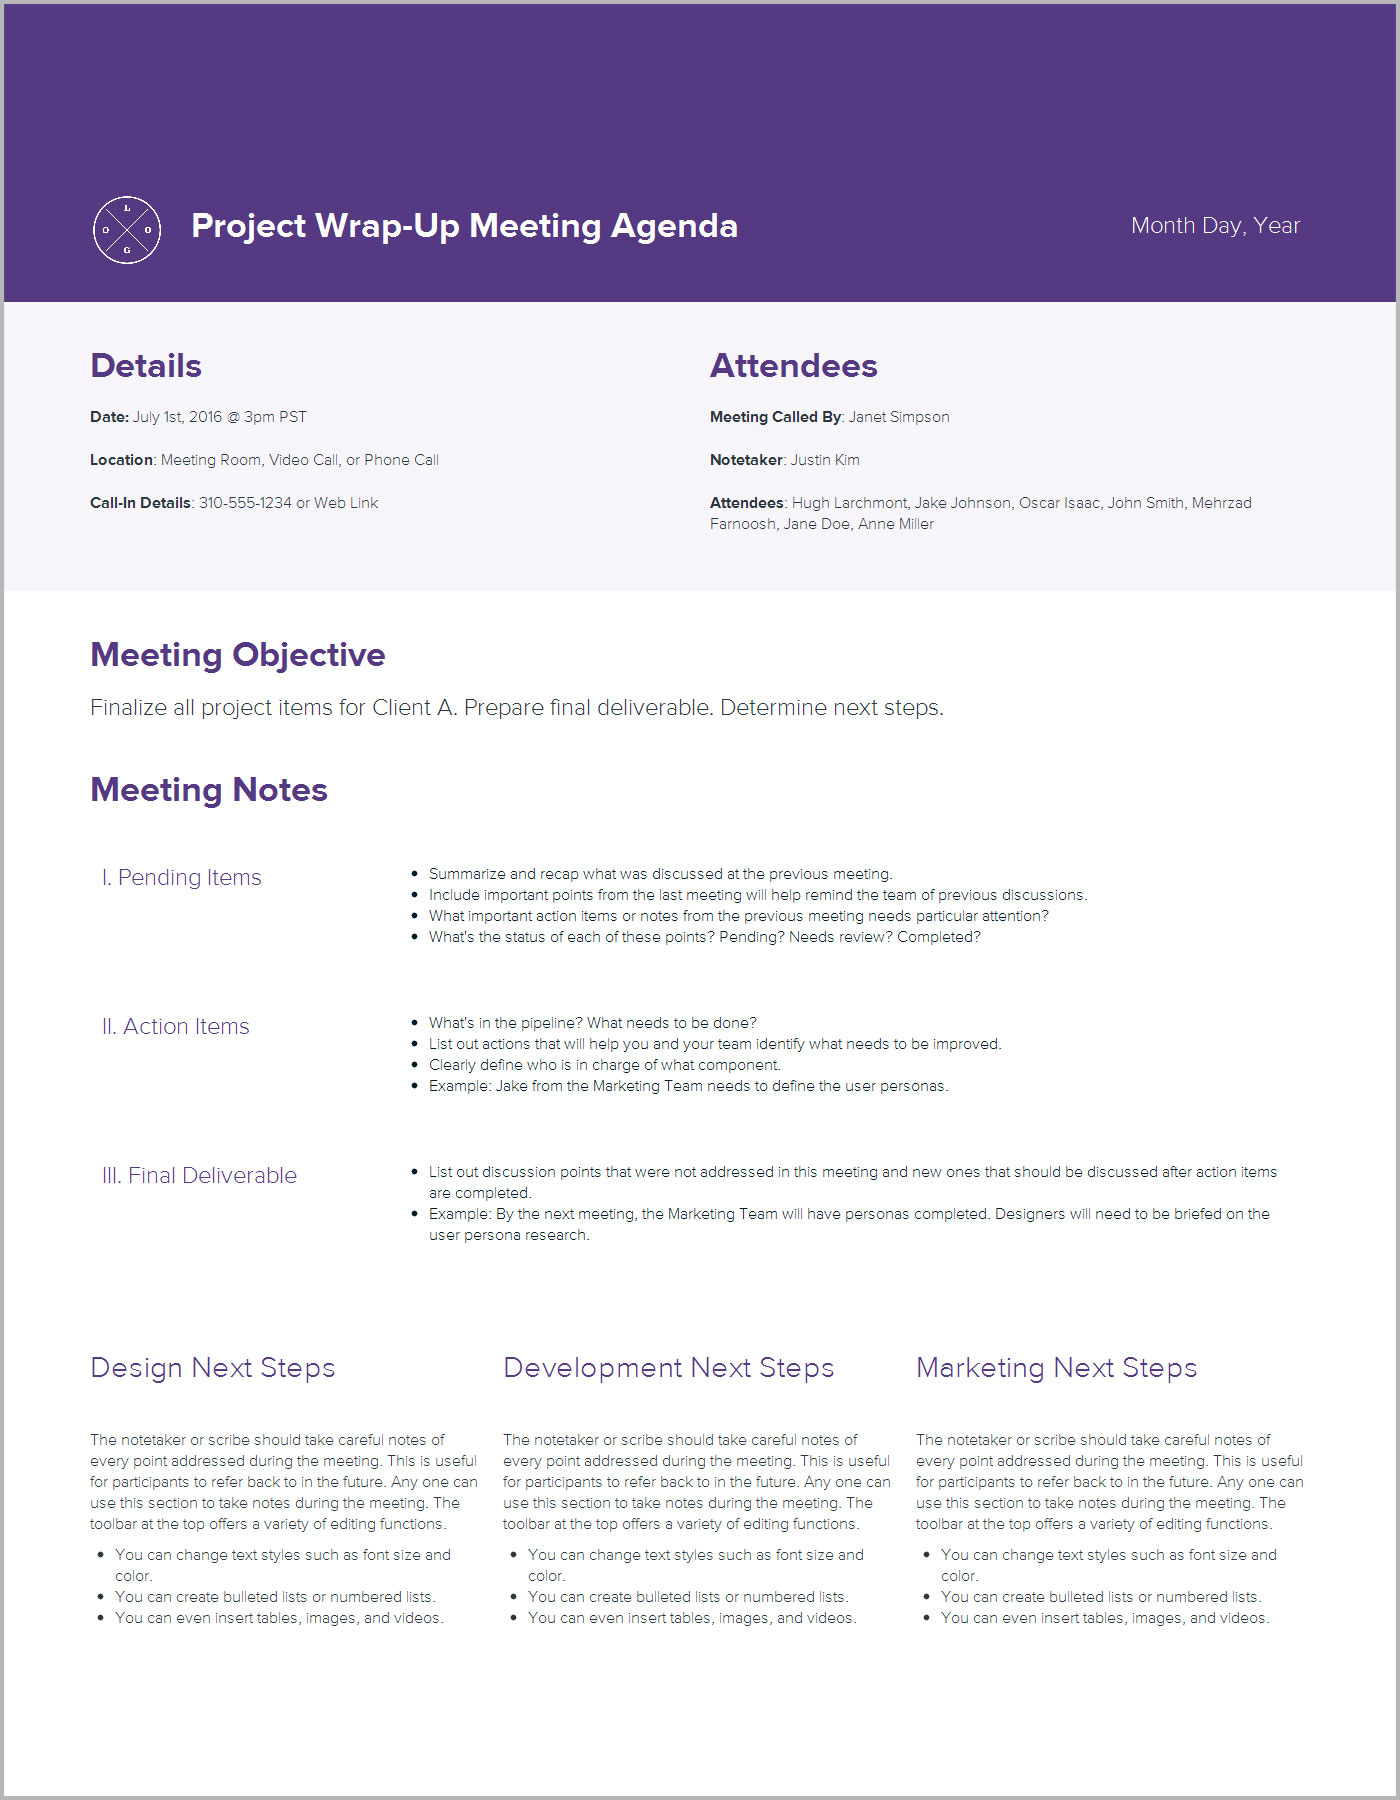 Xtensio How To Create a Meeting Agenda